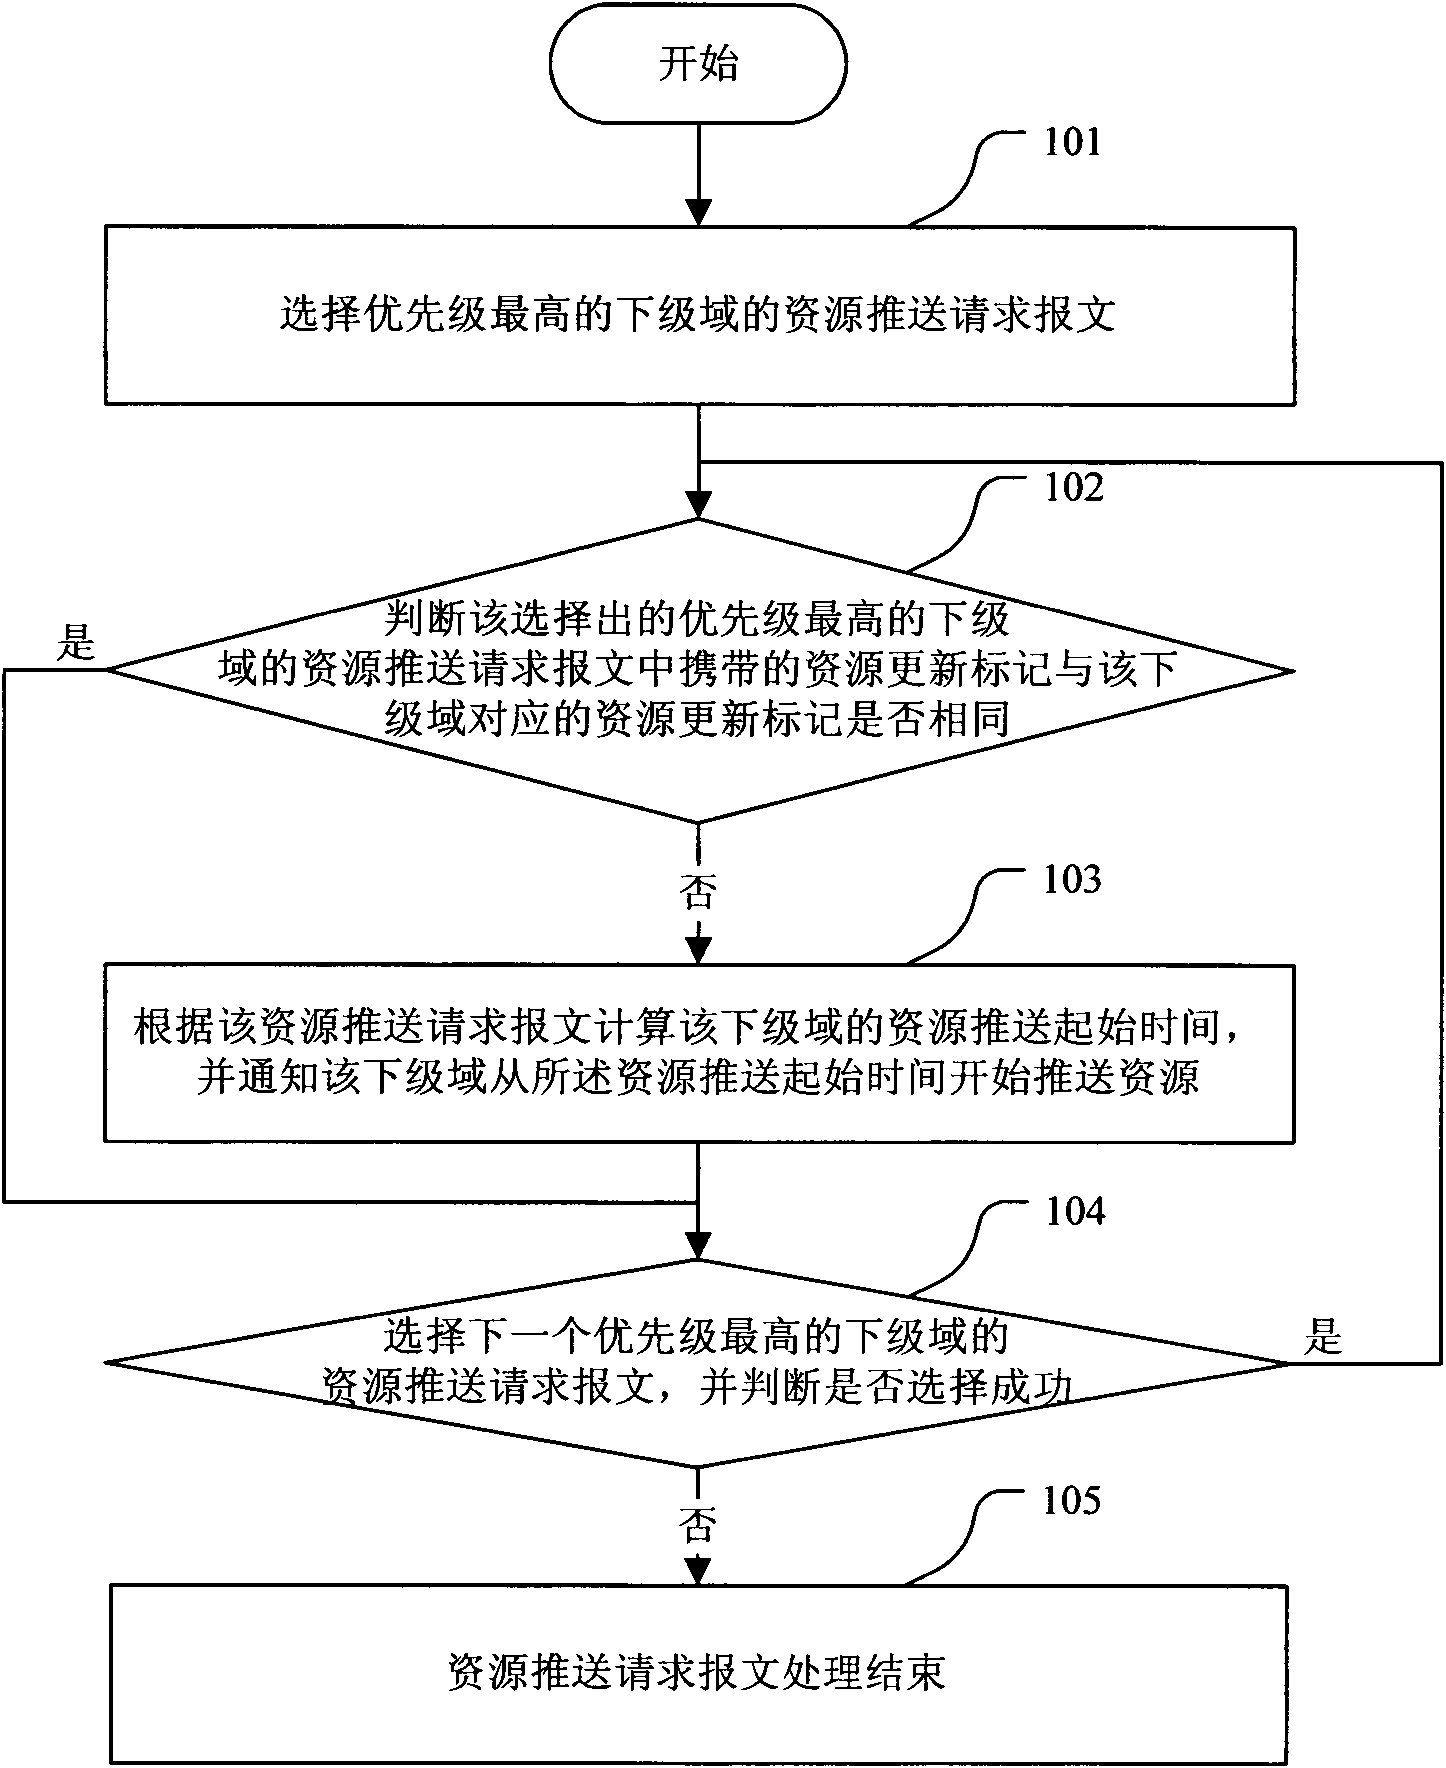 Method and device for pushing inter-domain resources